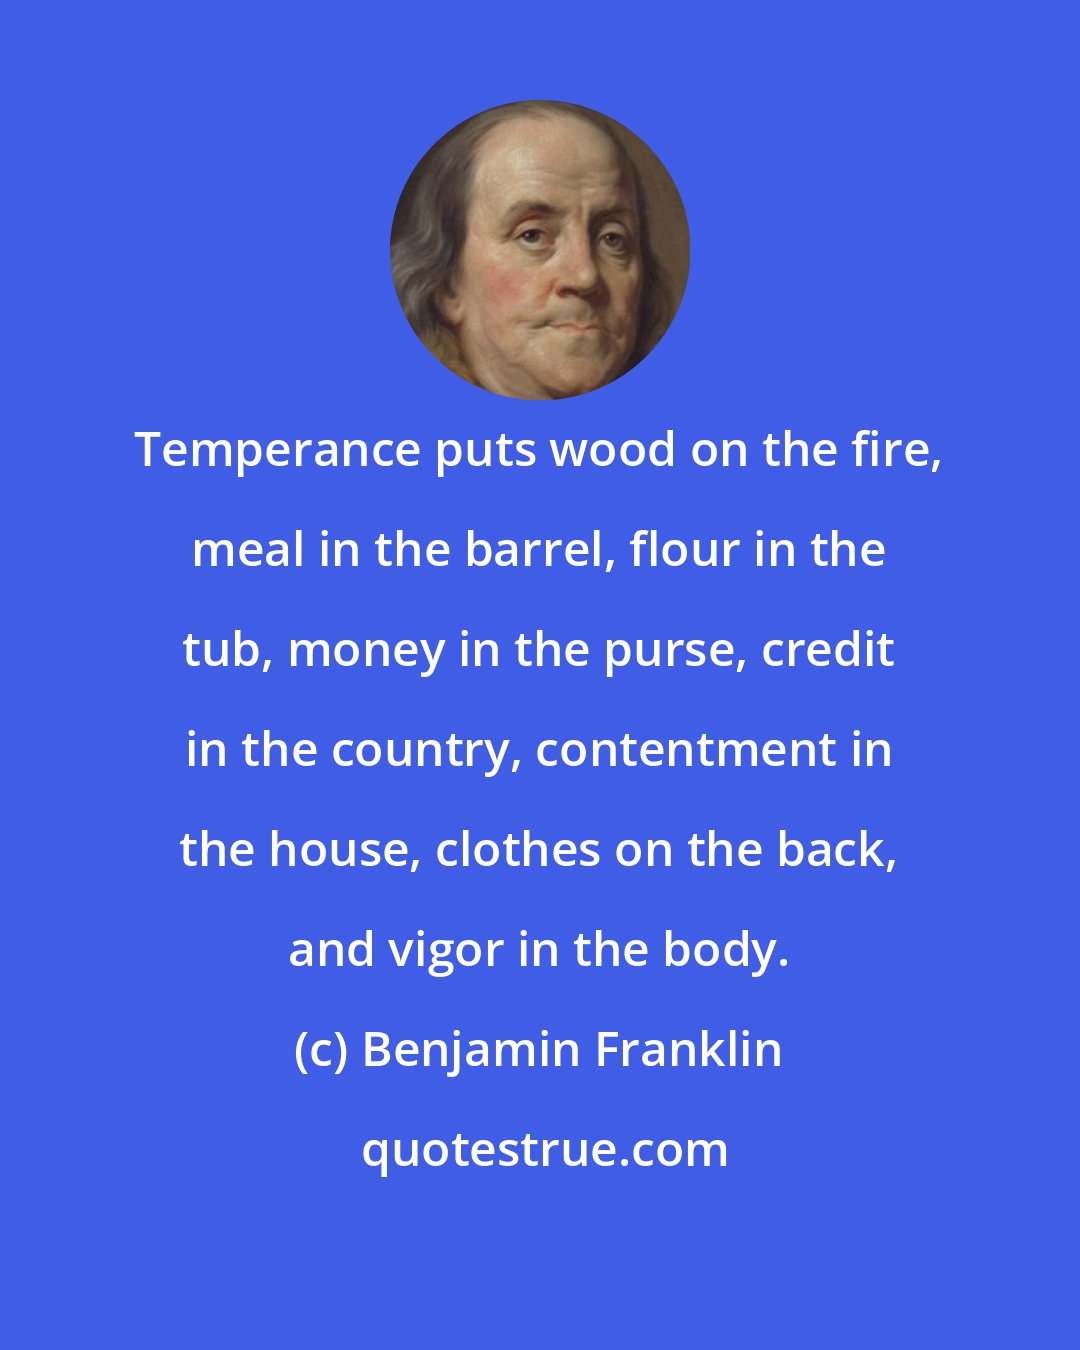 Benjamin Franklin: Temperance puts wood on the fire, meal in the barrel, flour in the tub, money in the purse, credit in the country, contentment in the house, clothes on the back, and vigor in the body.